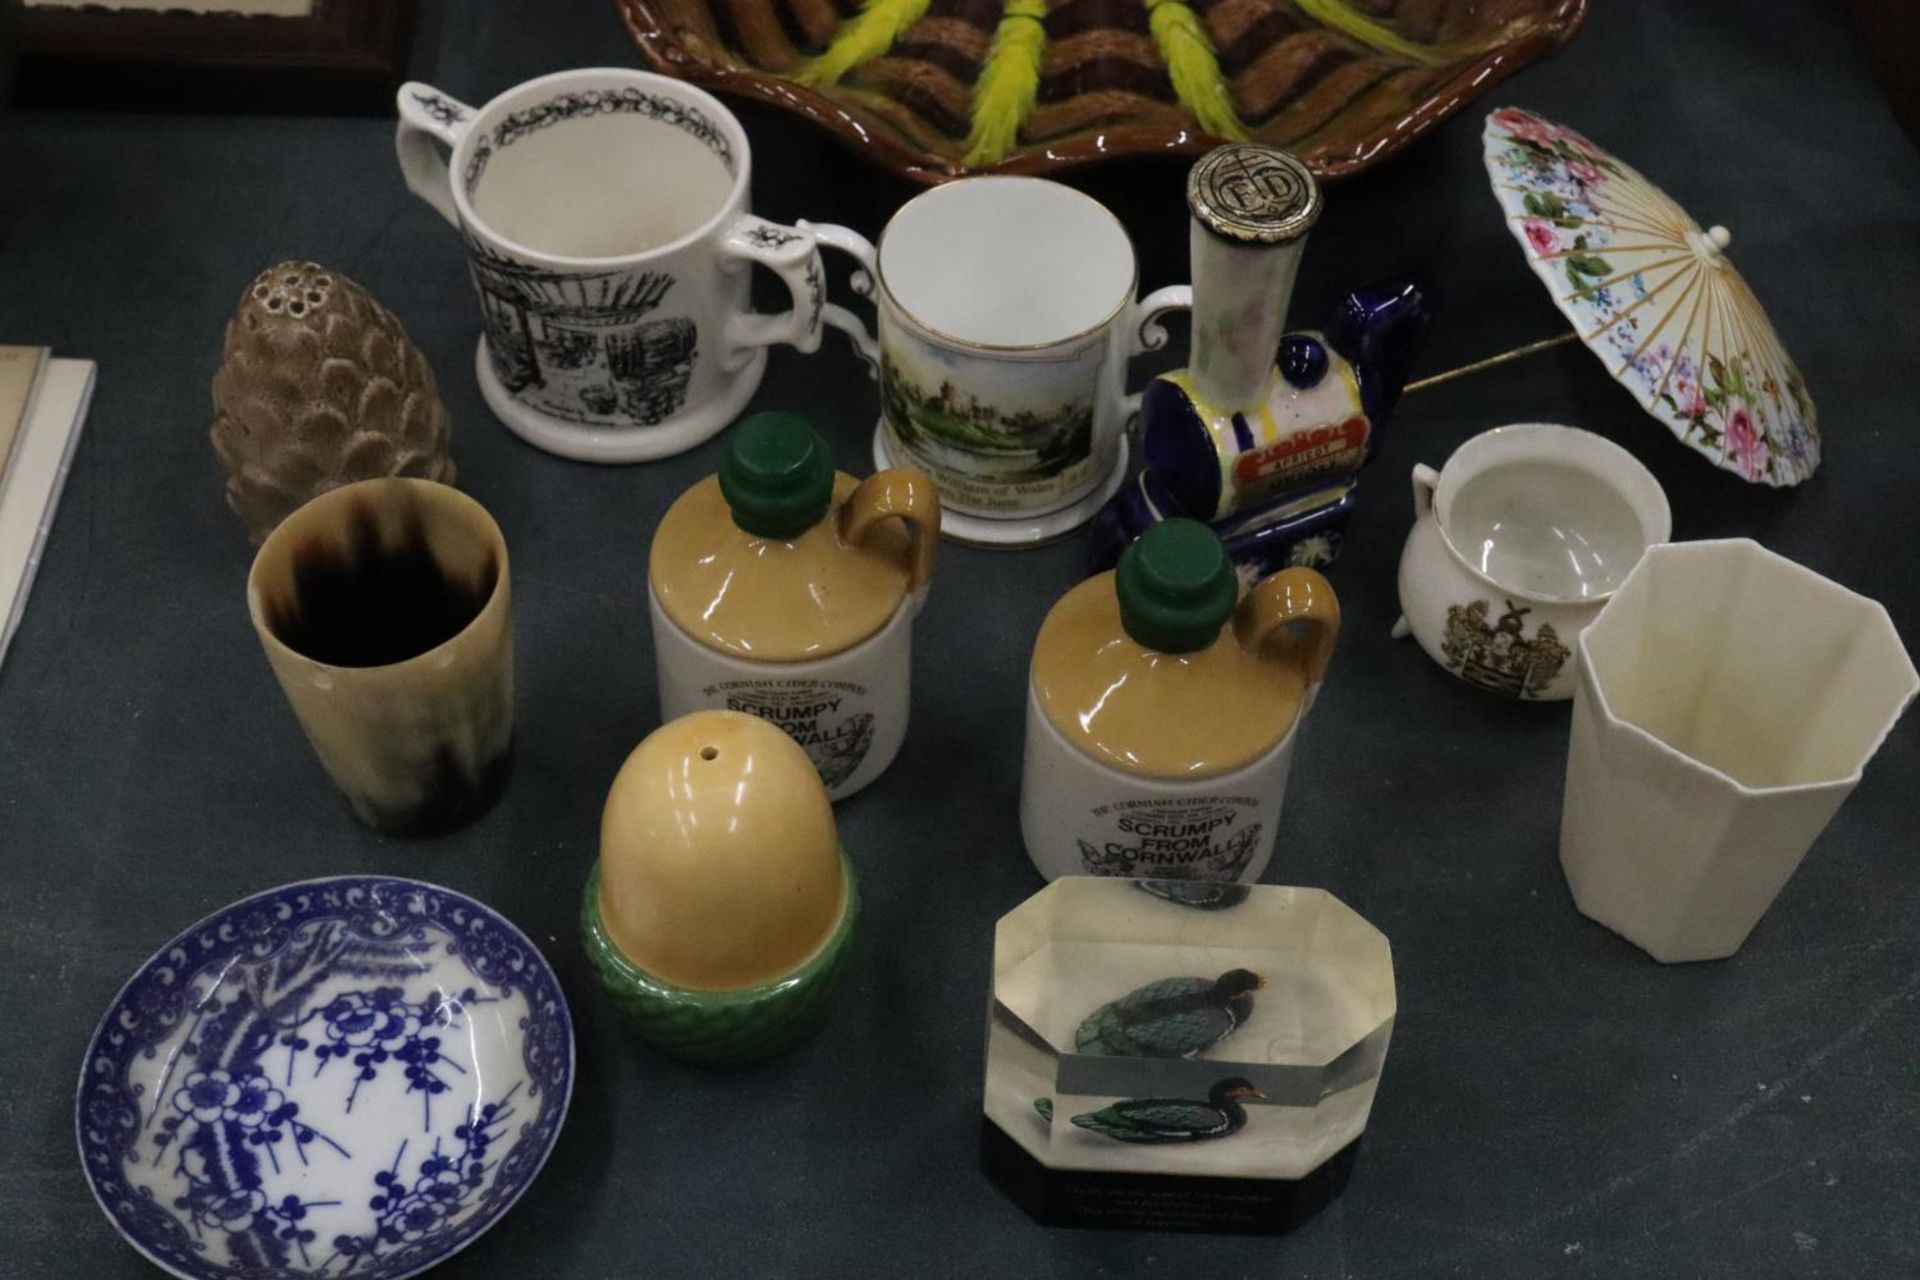 A QUANTITY OF CERAMIC ITEMS TO INCLUDE A MAJOLICA STYLE BOWL, SMALL SCRUMPY STONEWARE BOTTLES, AN - Image 3 of 5